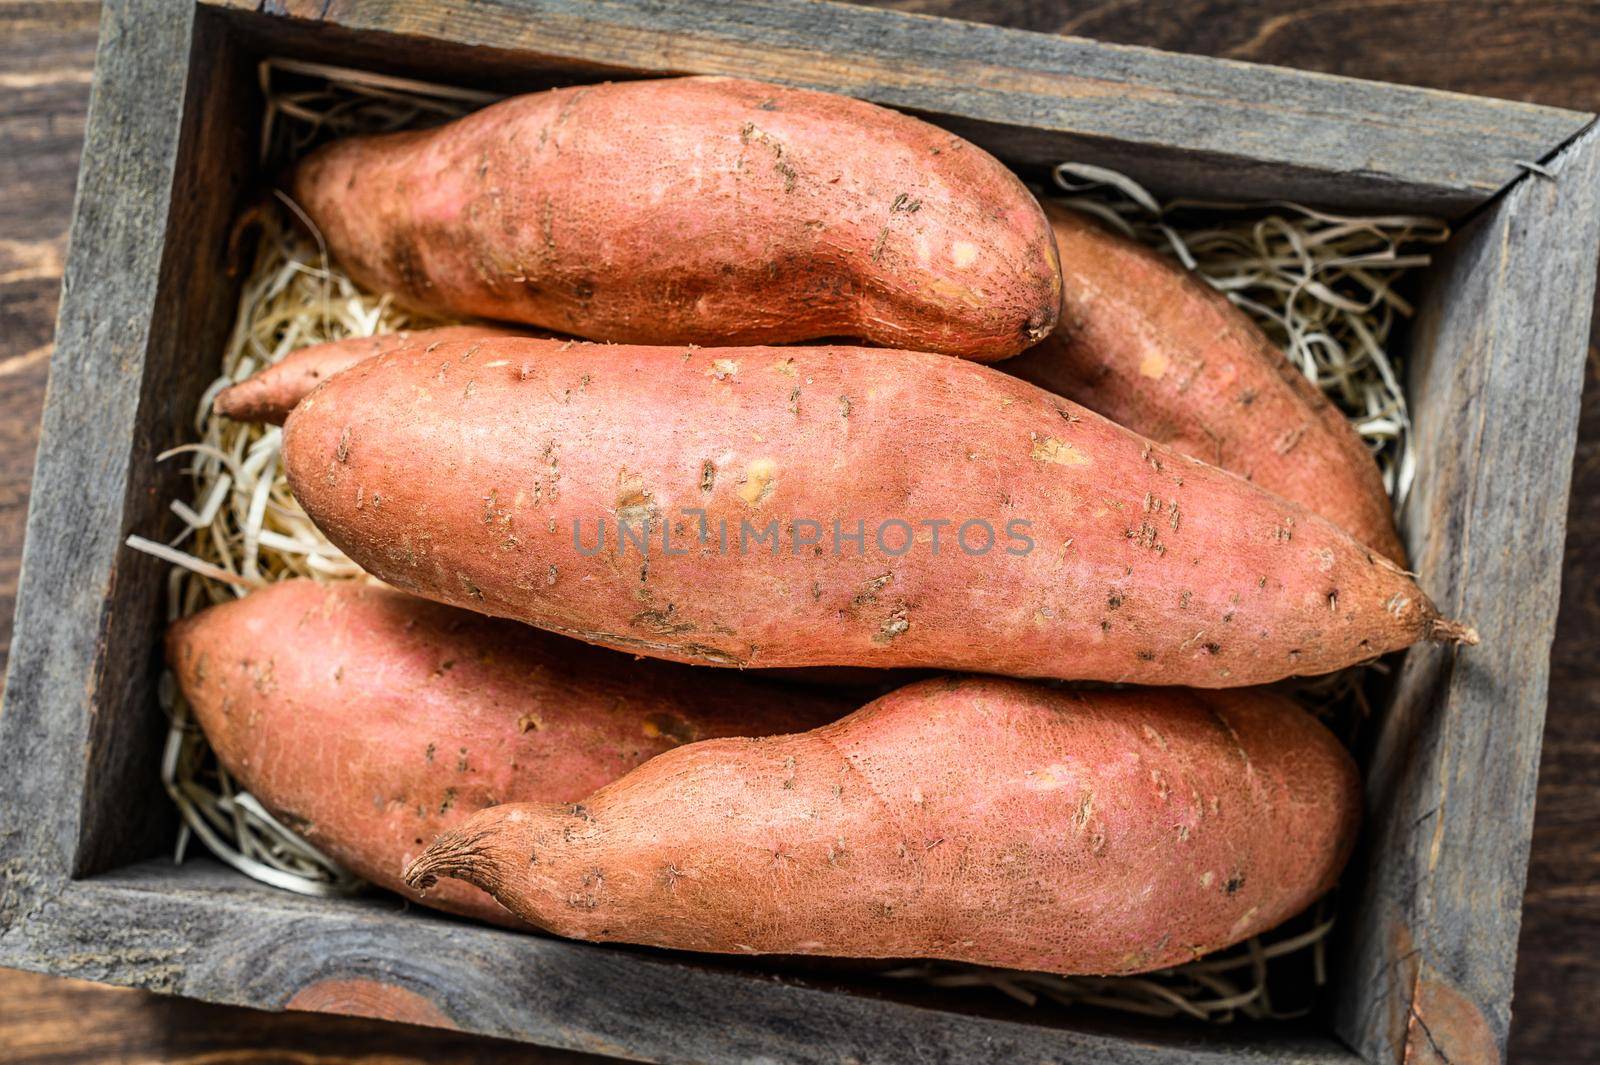 Raw batata Sweet potato on Wooden table. Wooden background. Top view by Composter